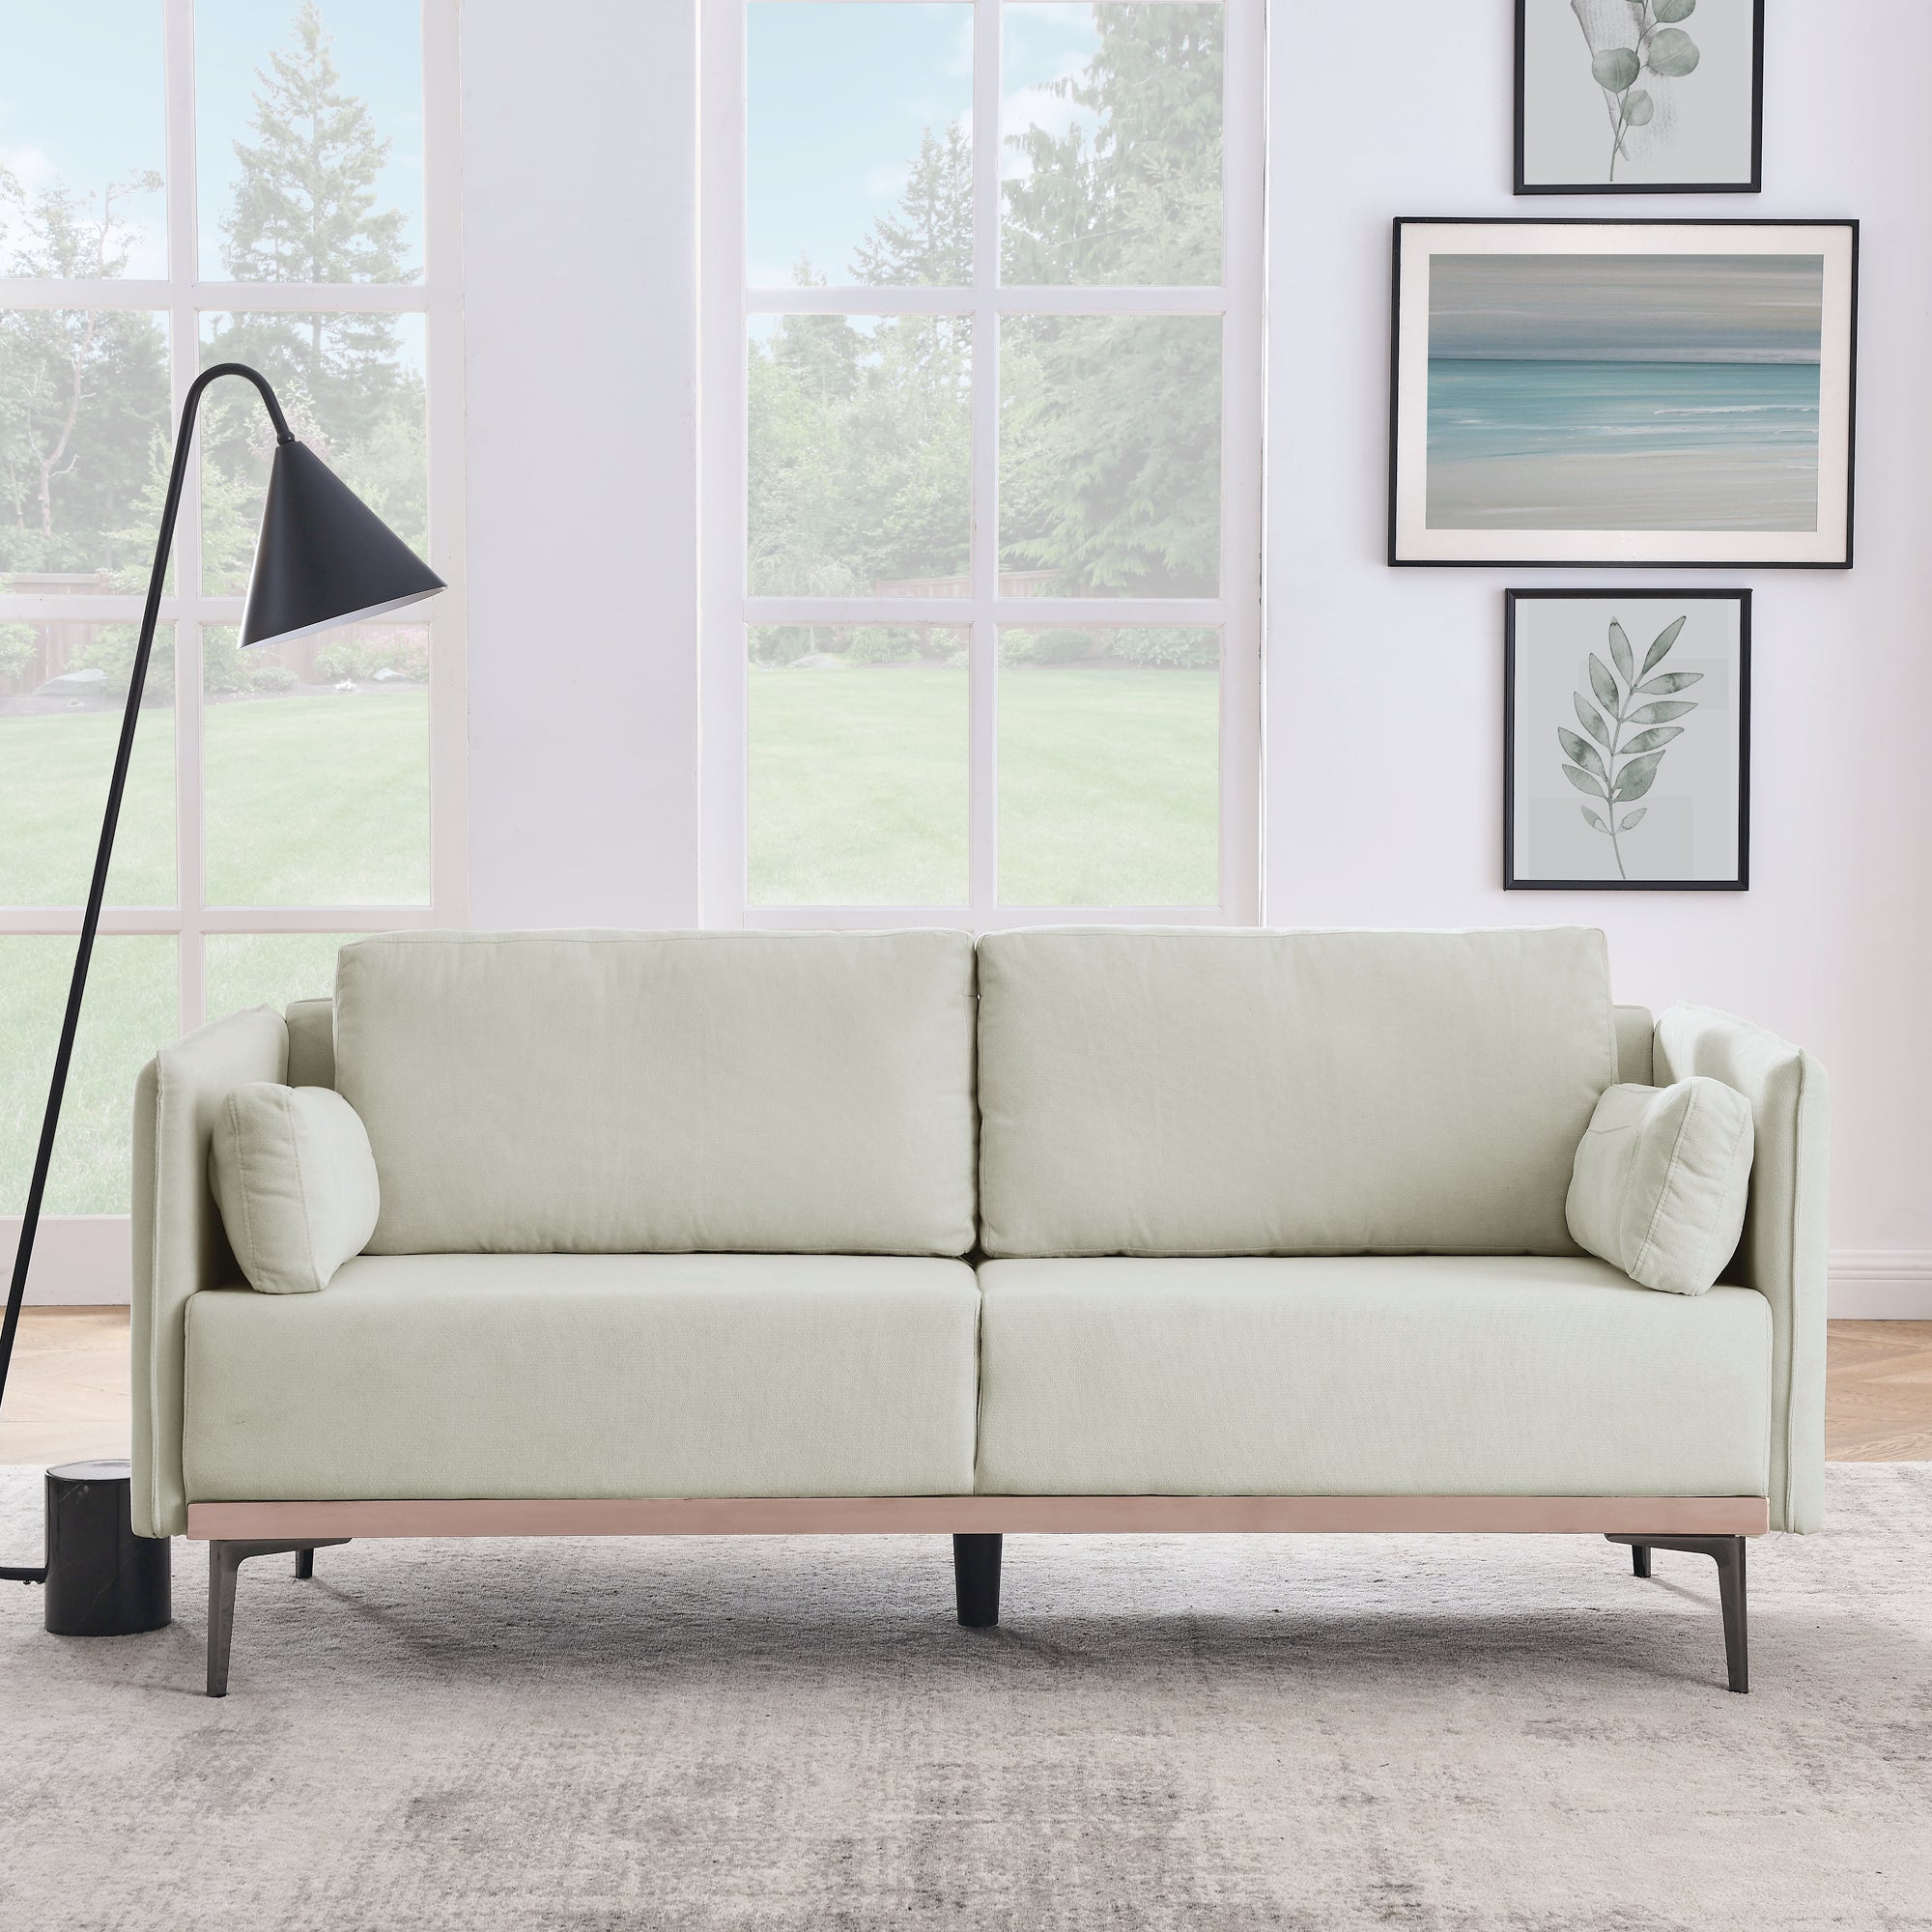 Modern Sofa 3-Seat Couch with Stainless Steel Trim and Metal Legs